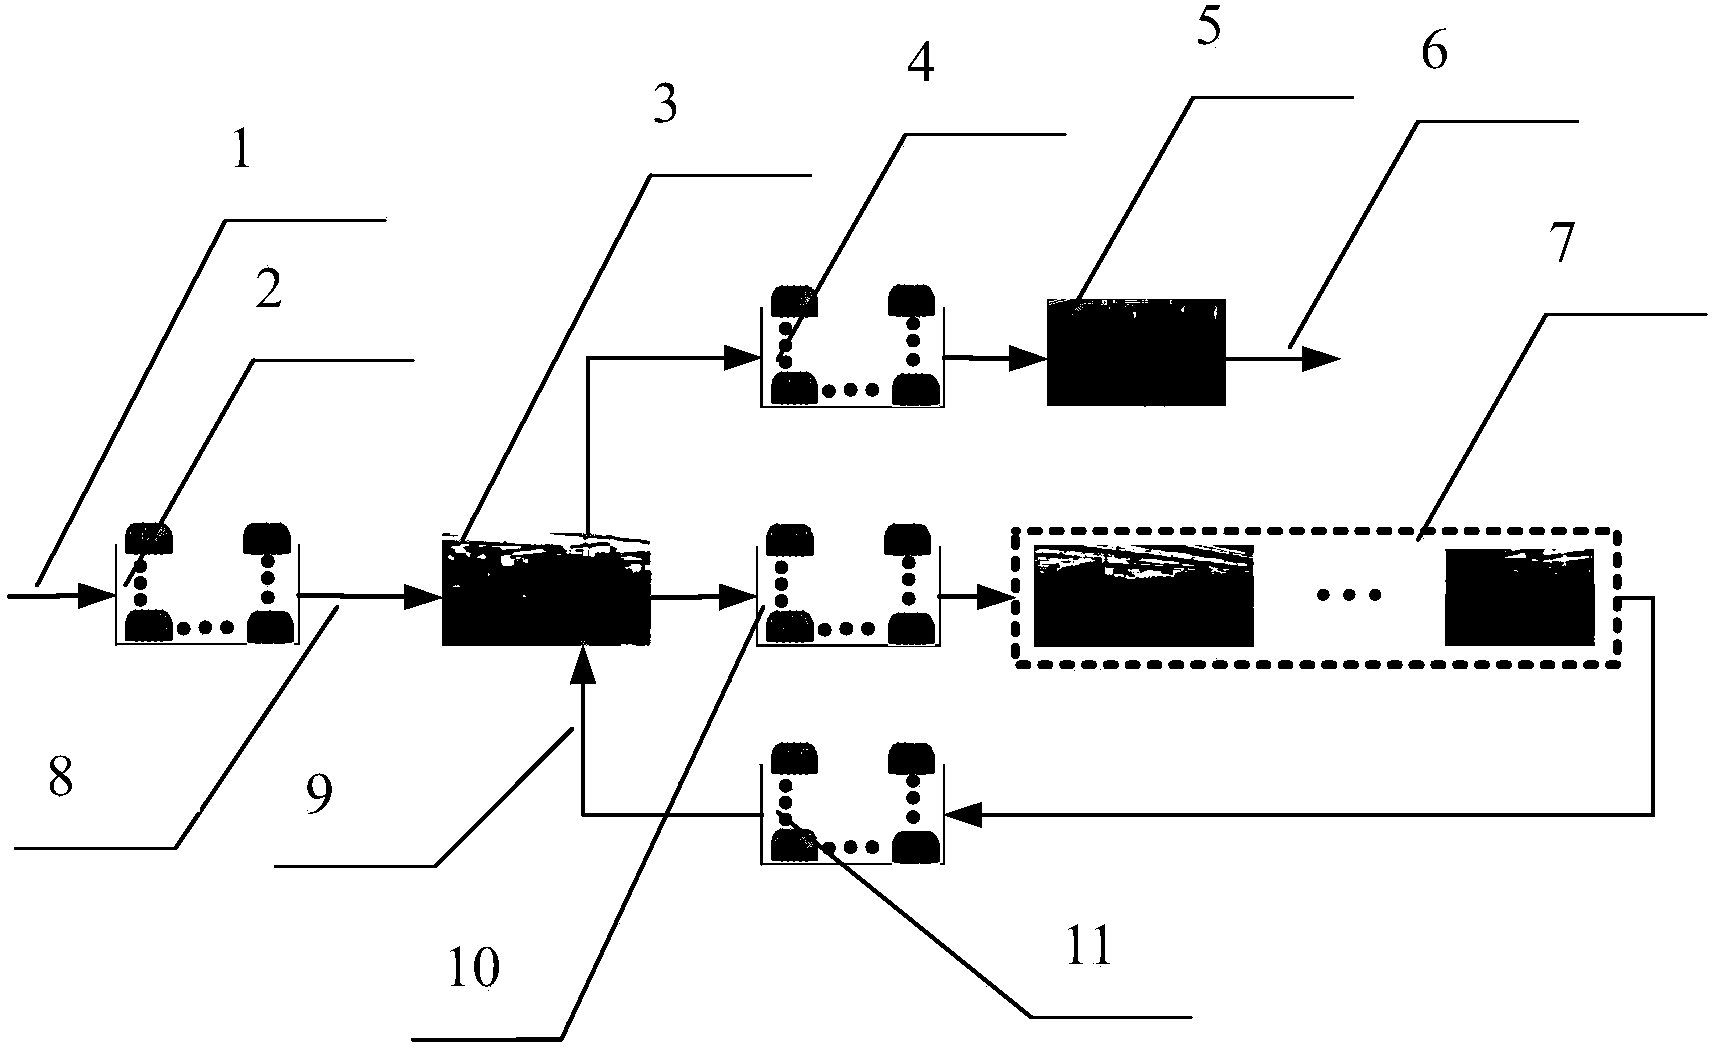 Dispatching control method for batch processor of reentrant manufacturing system